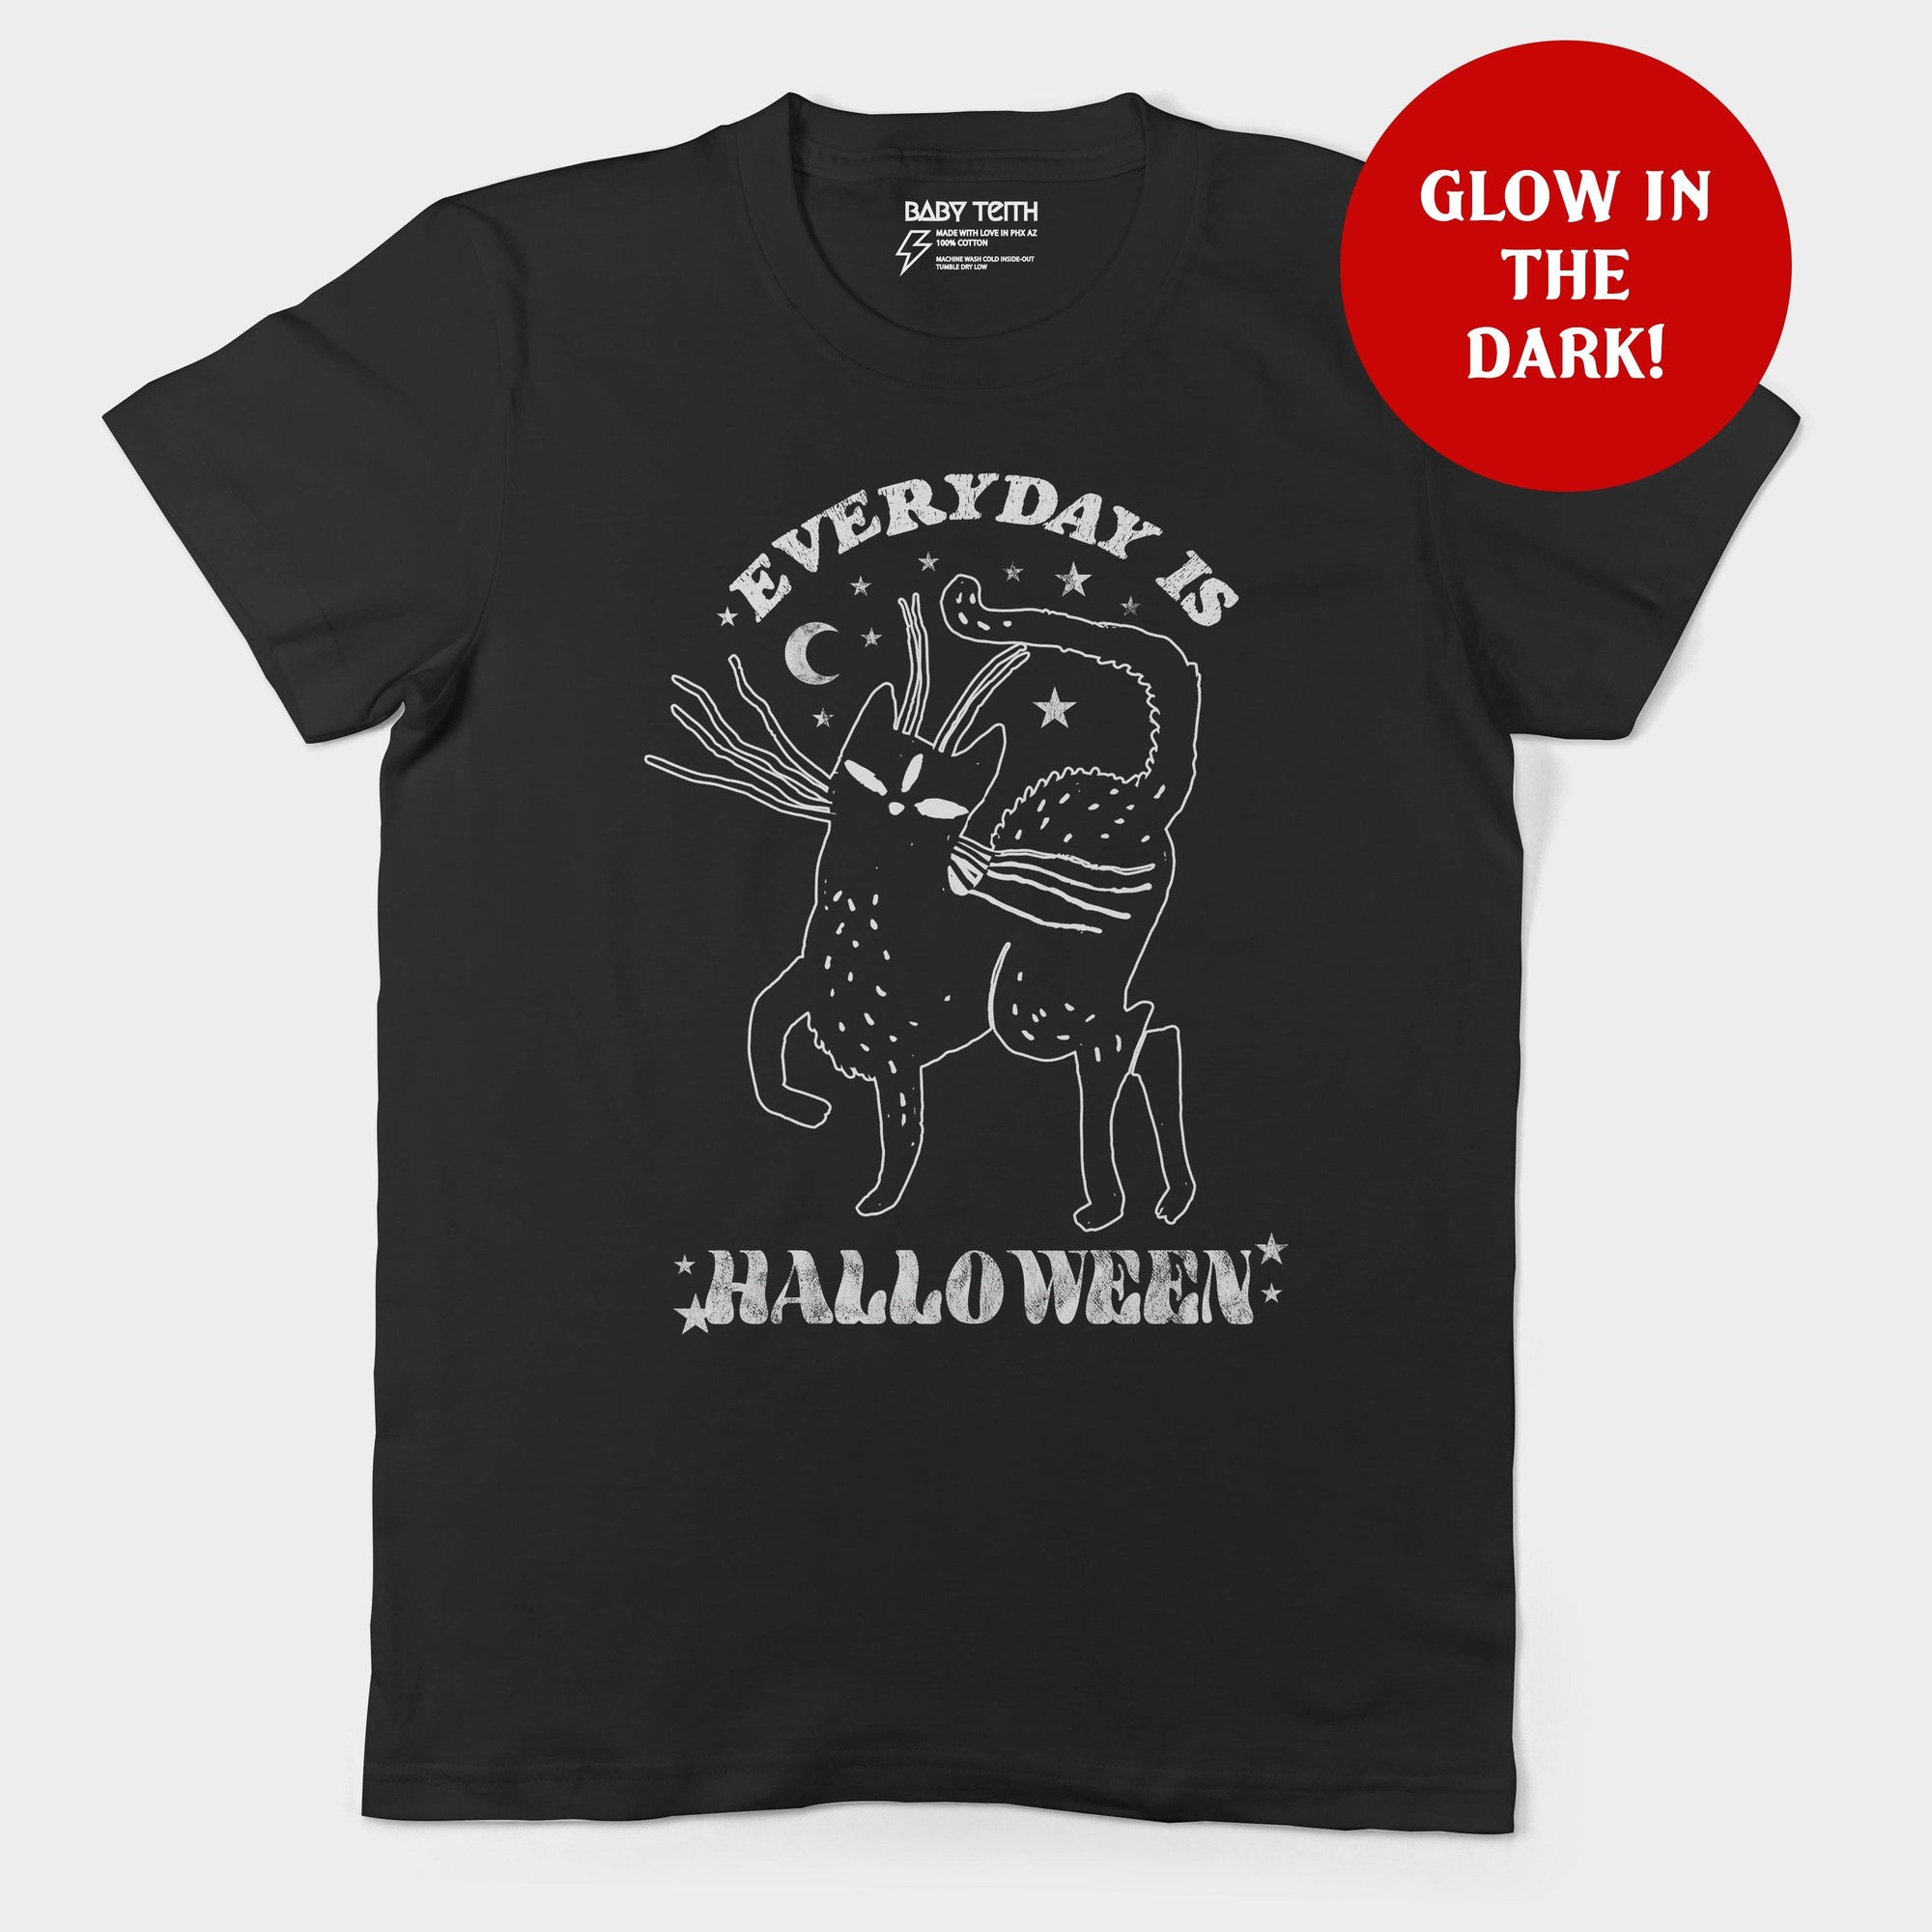 Everyday is Halloween Glow in the Dark Unisex Tee for Adults - Baby Teith